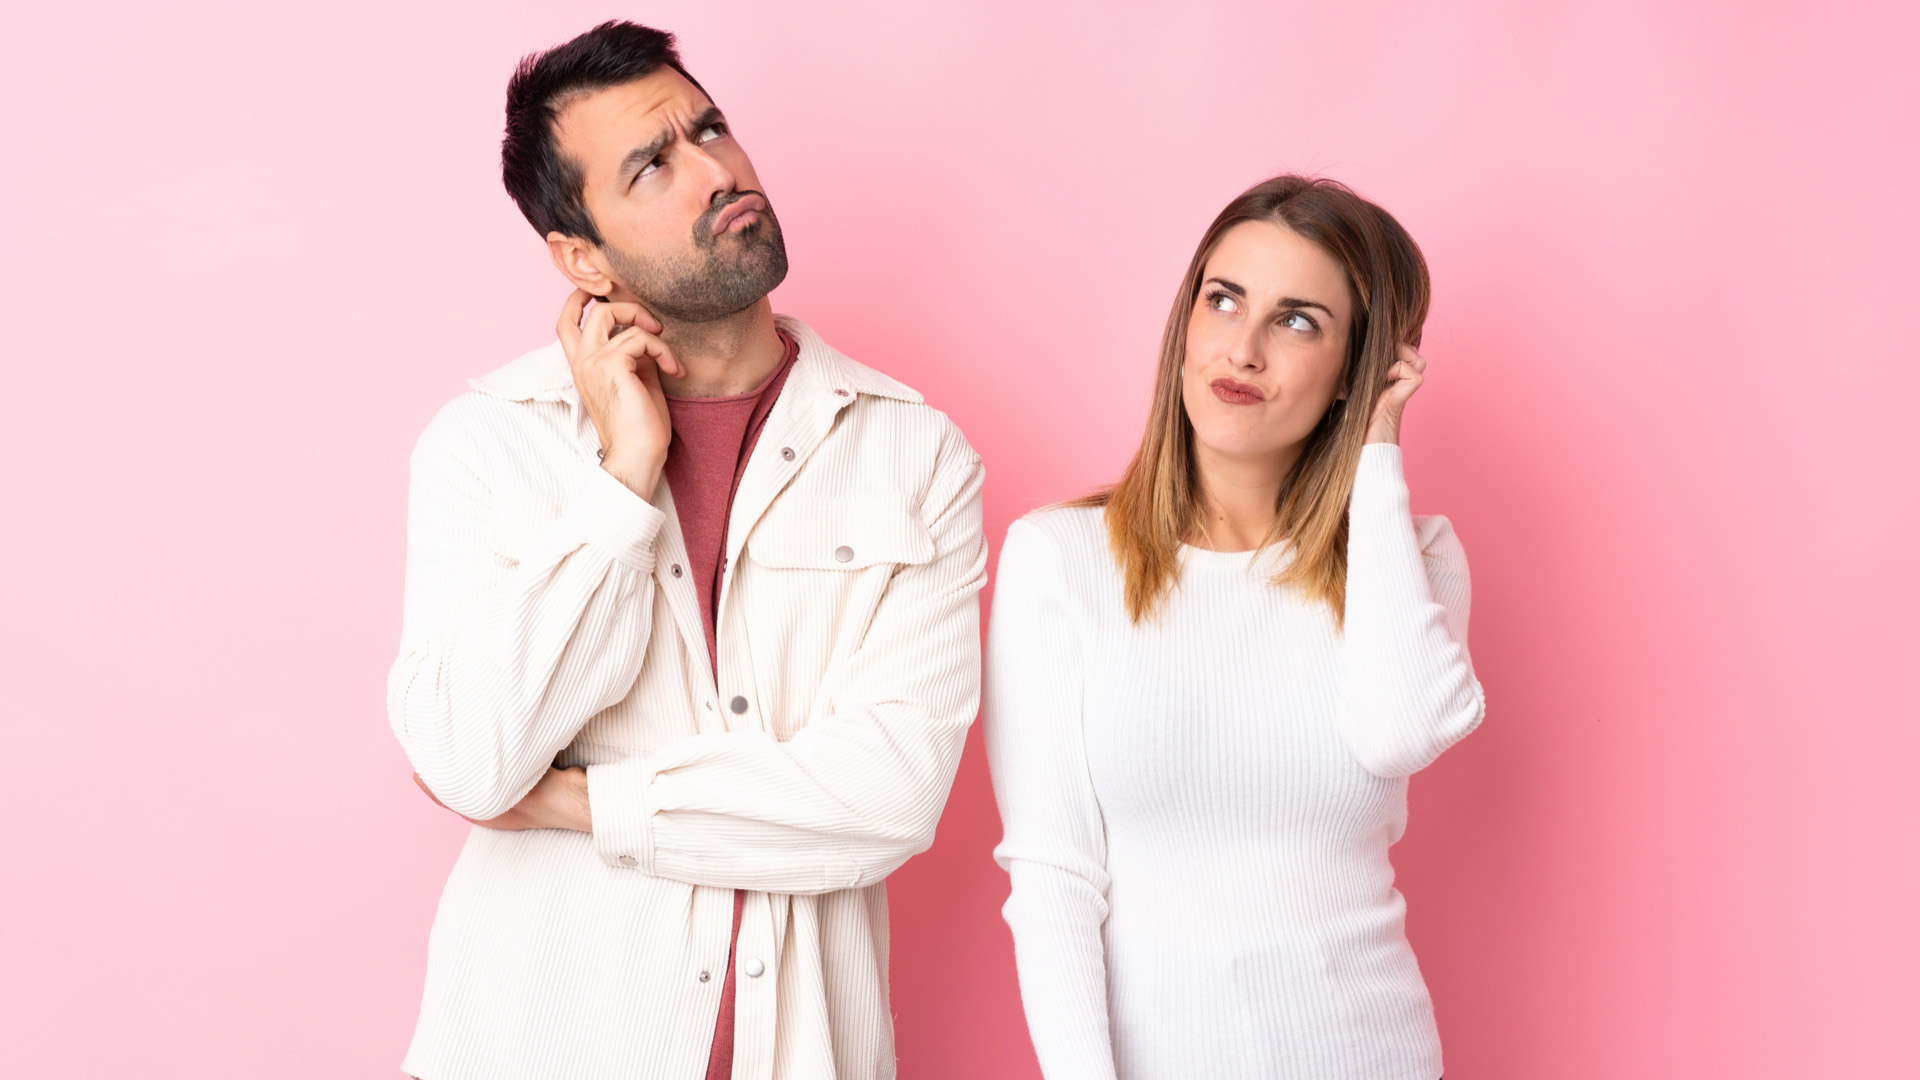 Brunette man and blonde woman both wearing white, scratching their heads and looking up in question. Pink background.